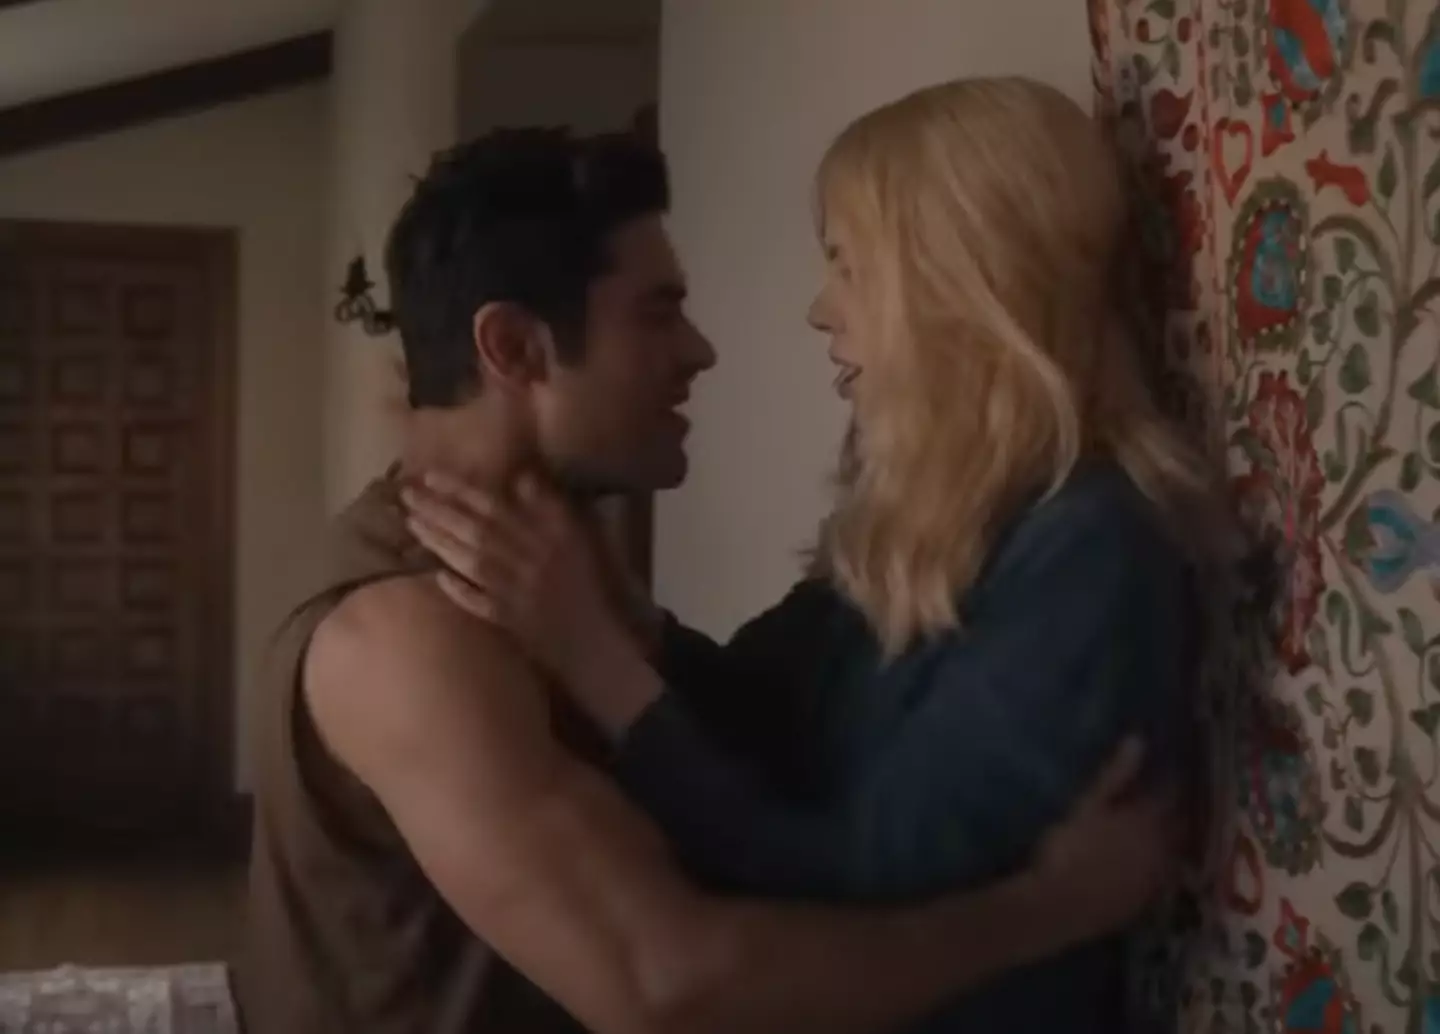 Kidman and Efron's characters strike up a relationship in the movie.